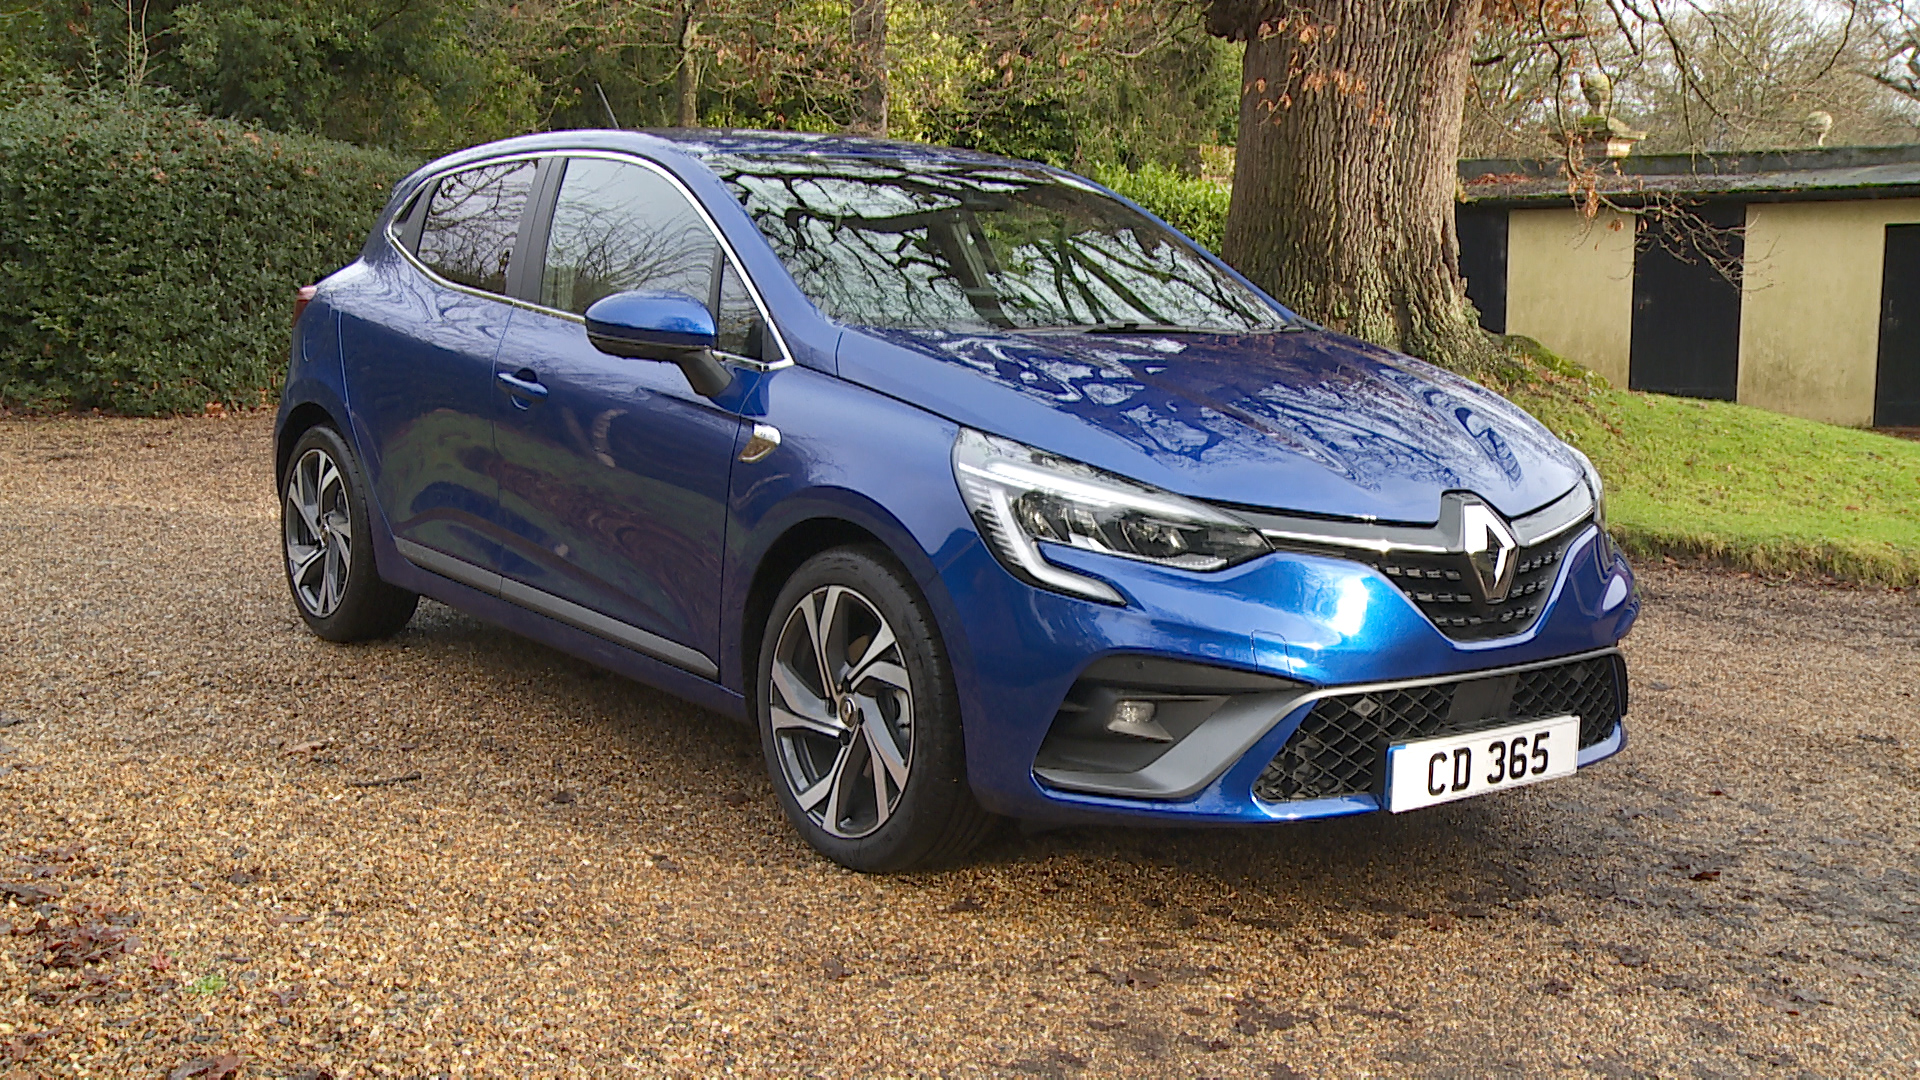 Brand New Renault Clio 1.0 TCe 90 Evolution 5dr